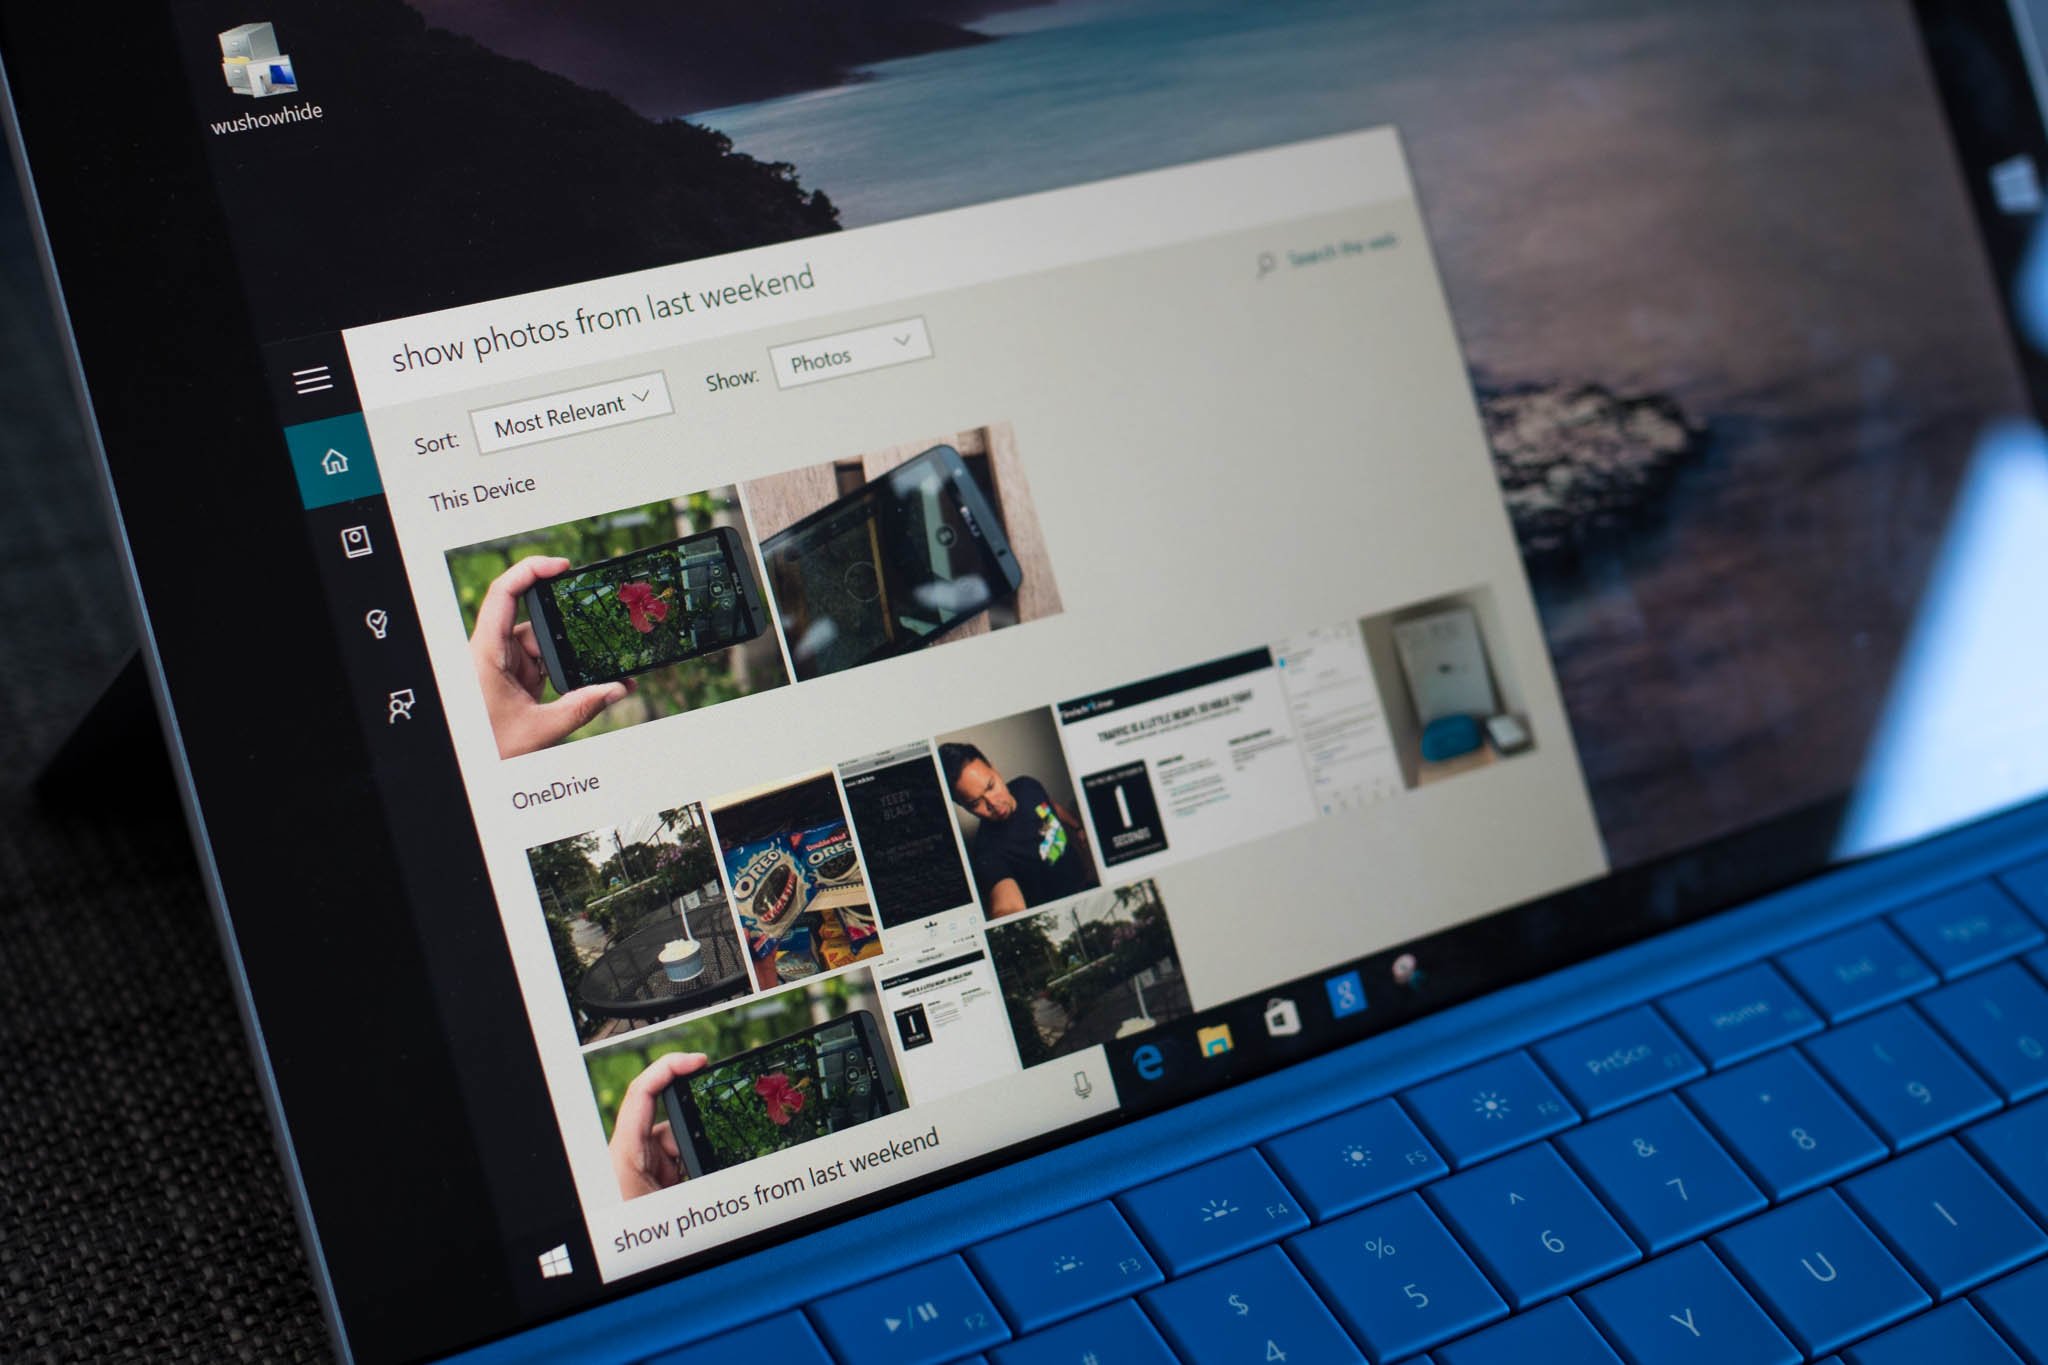 How to search for files in Windows 10 with Cortana | Windows Central